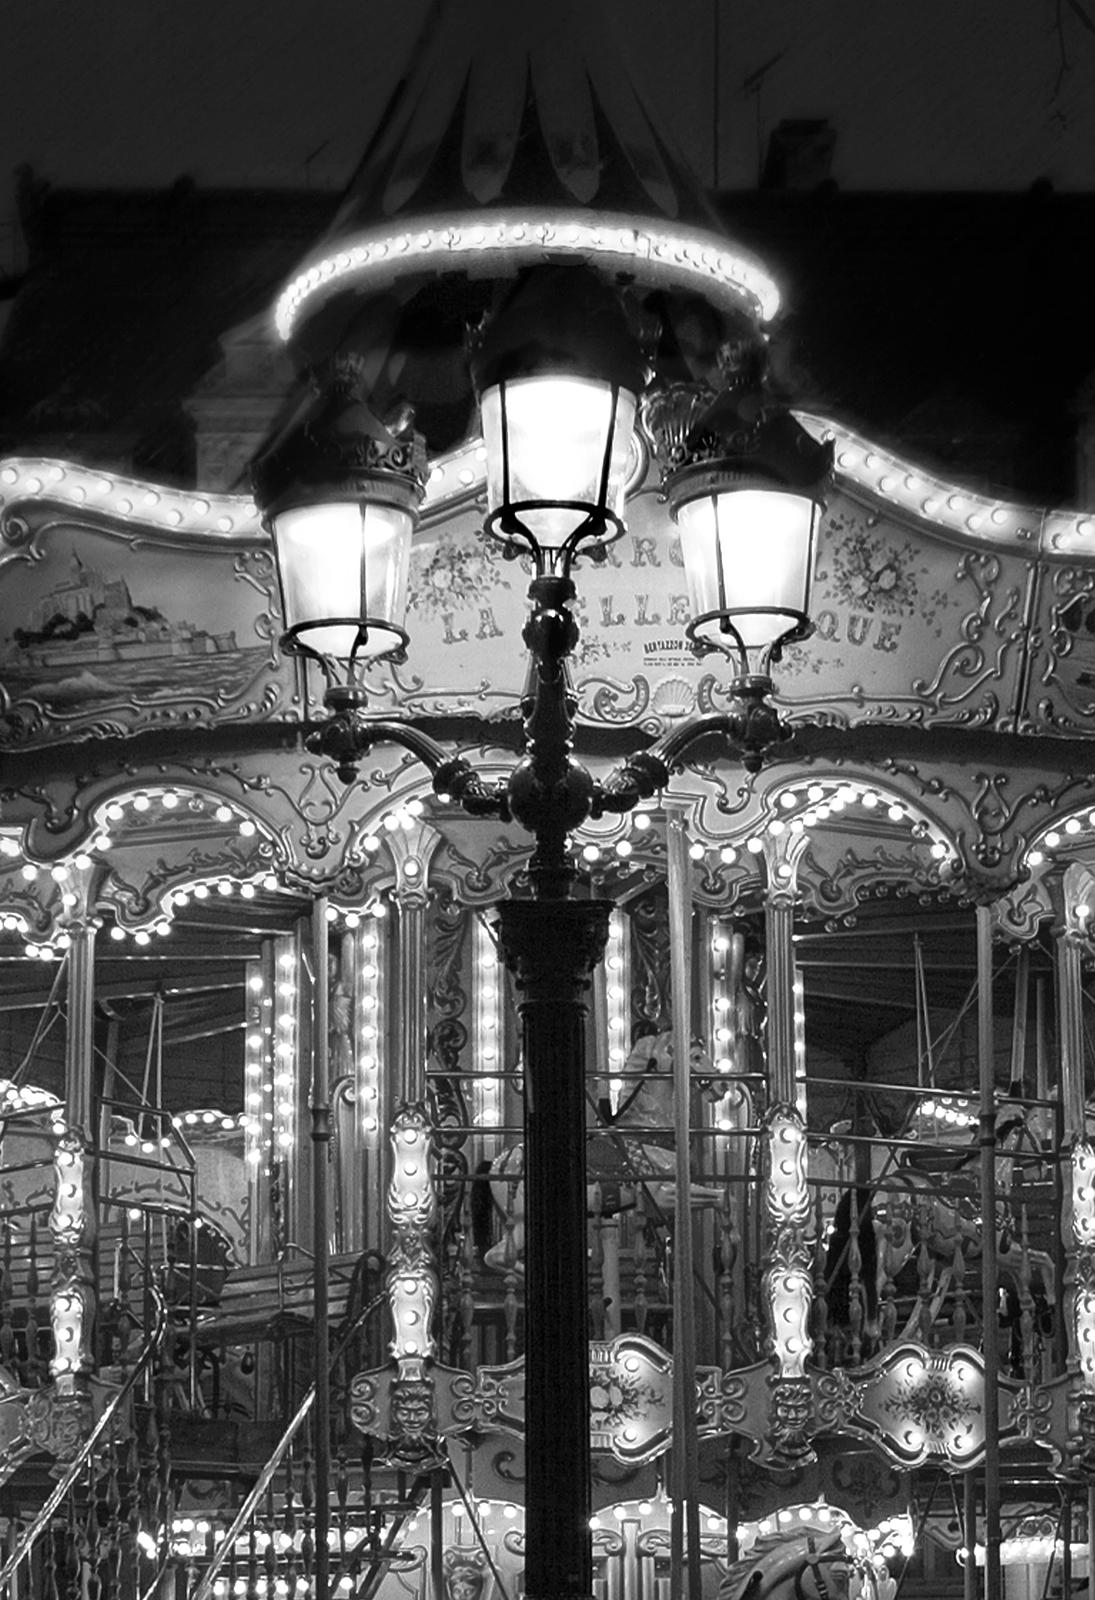 Carrousel- Signed limited edition still life print, Black white, Paris City - Photograph by Ian Sanderson